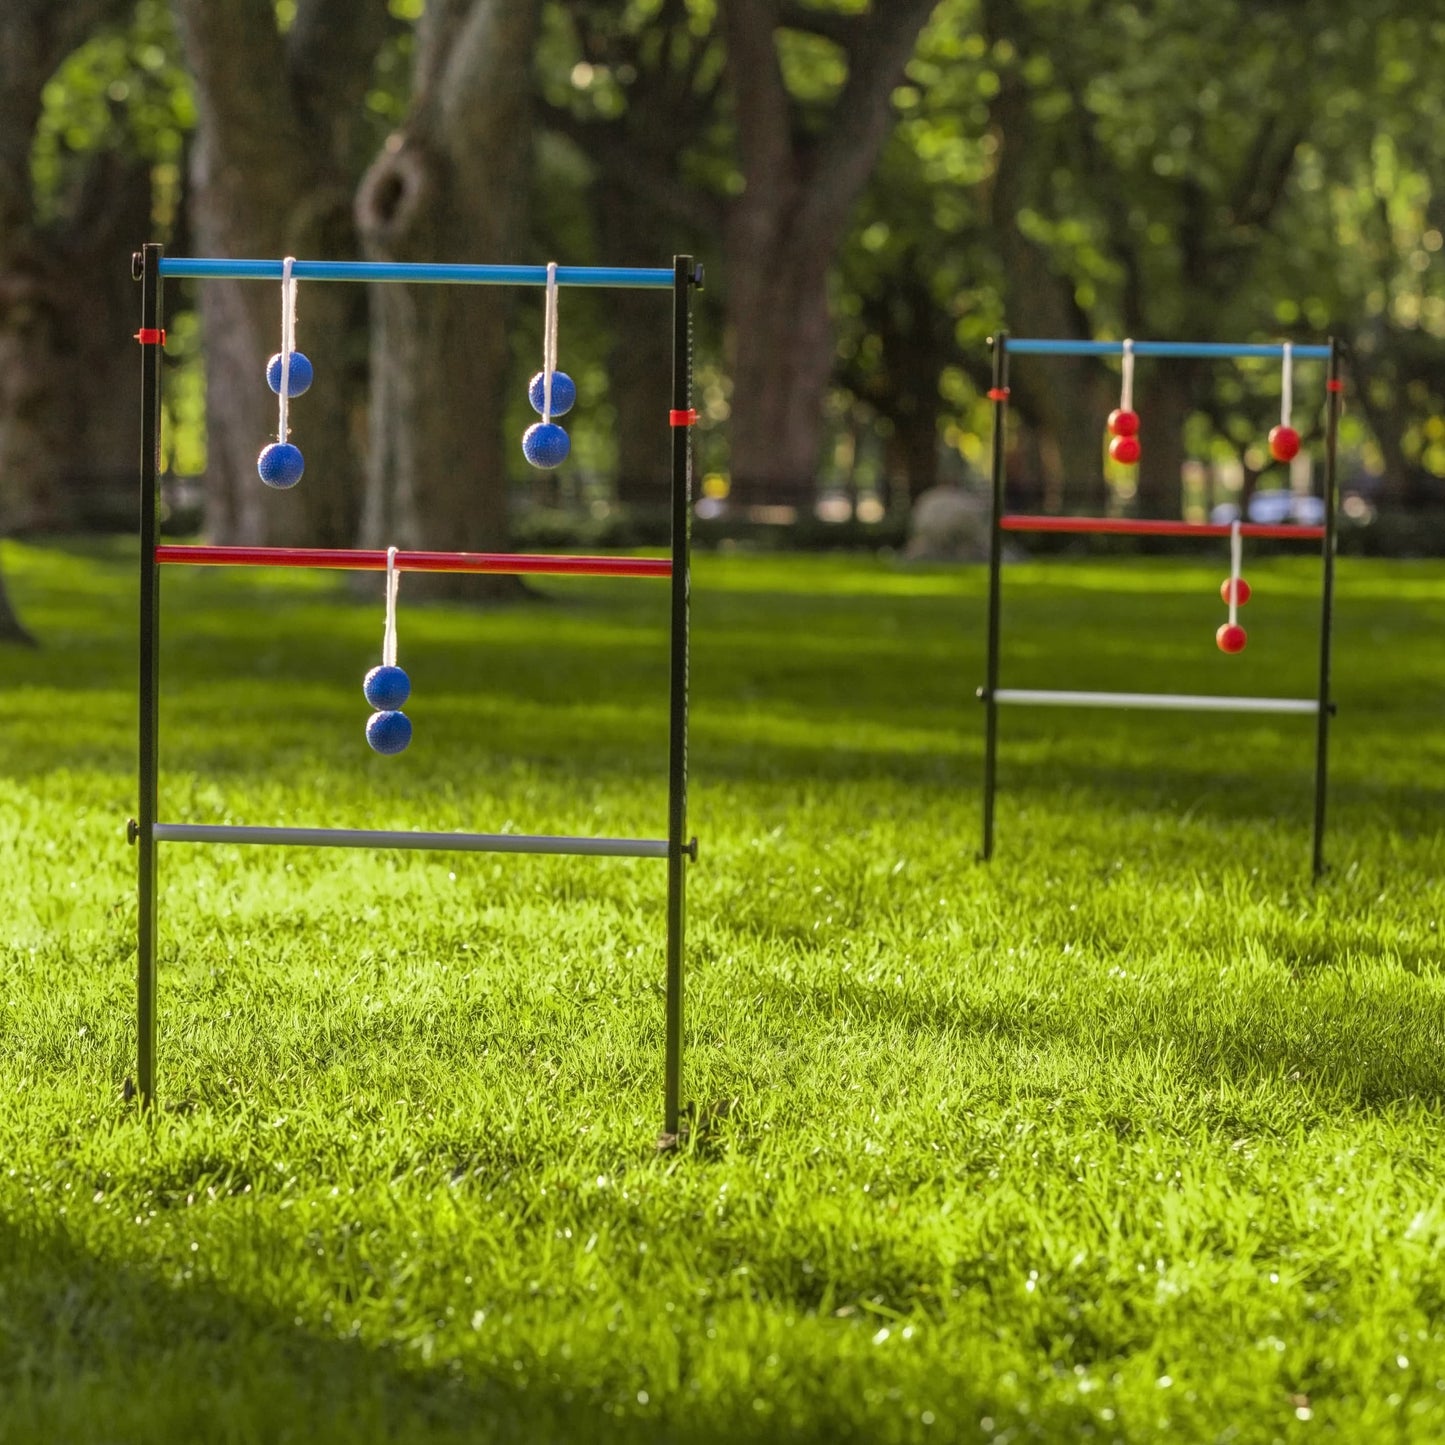 Sportcraft Steel Ladder Toss Lifestyle Image, Ladders sitting on grass in a park, waiting for players